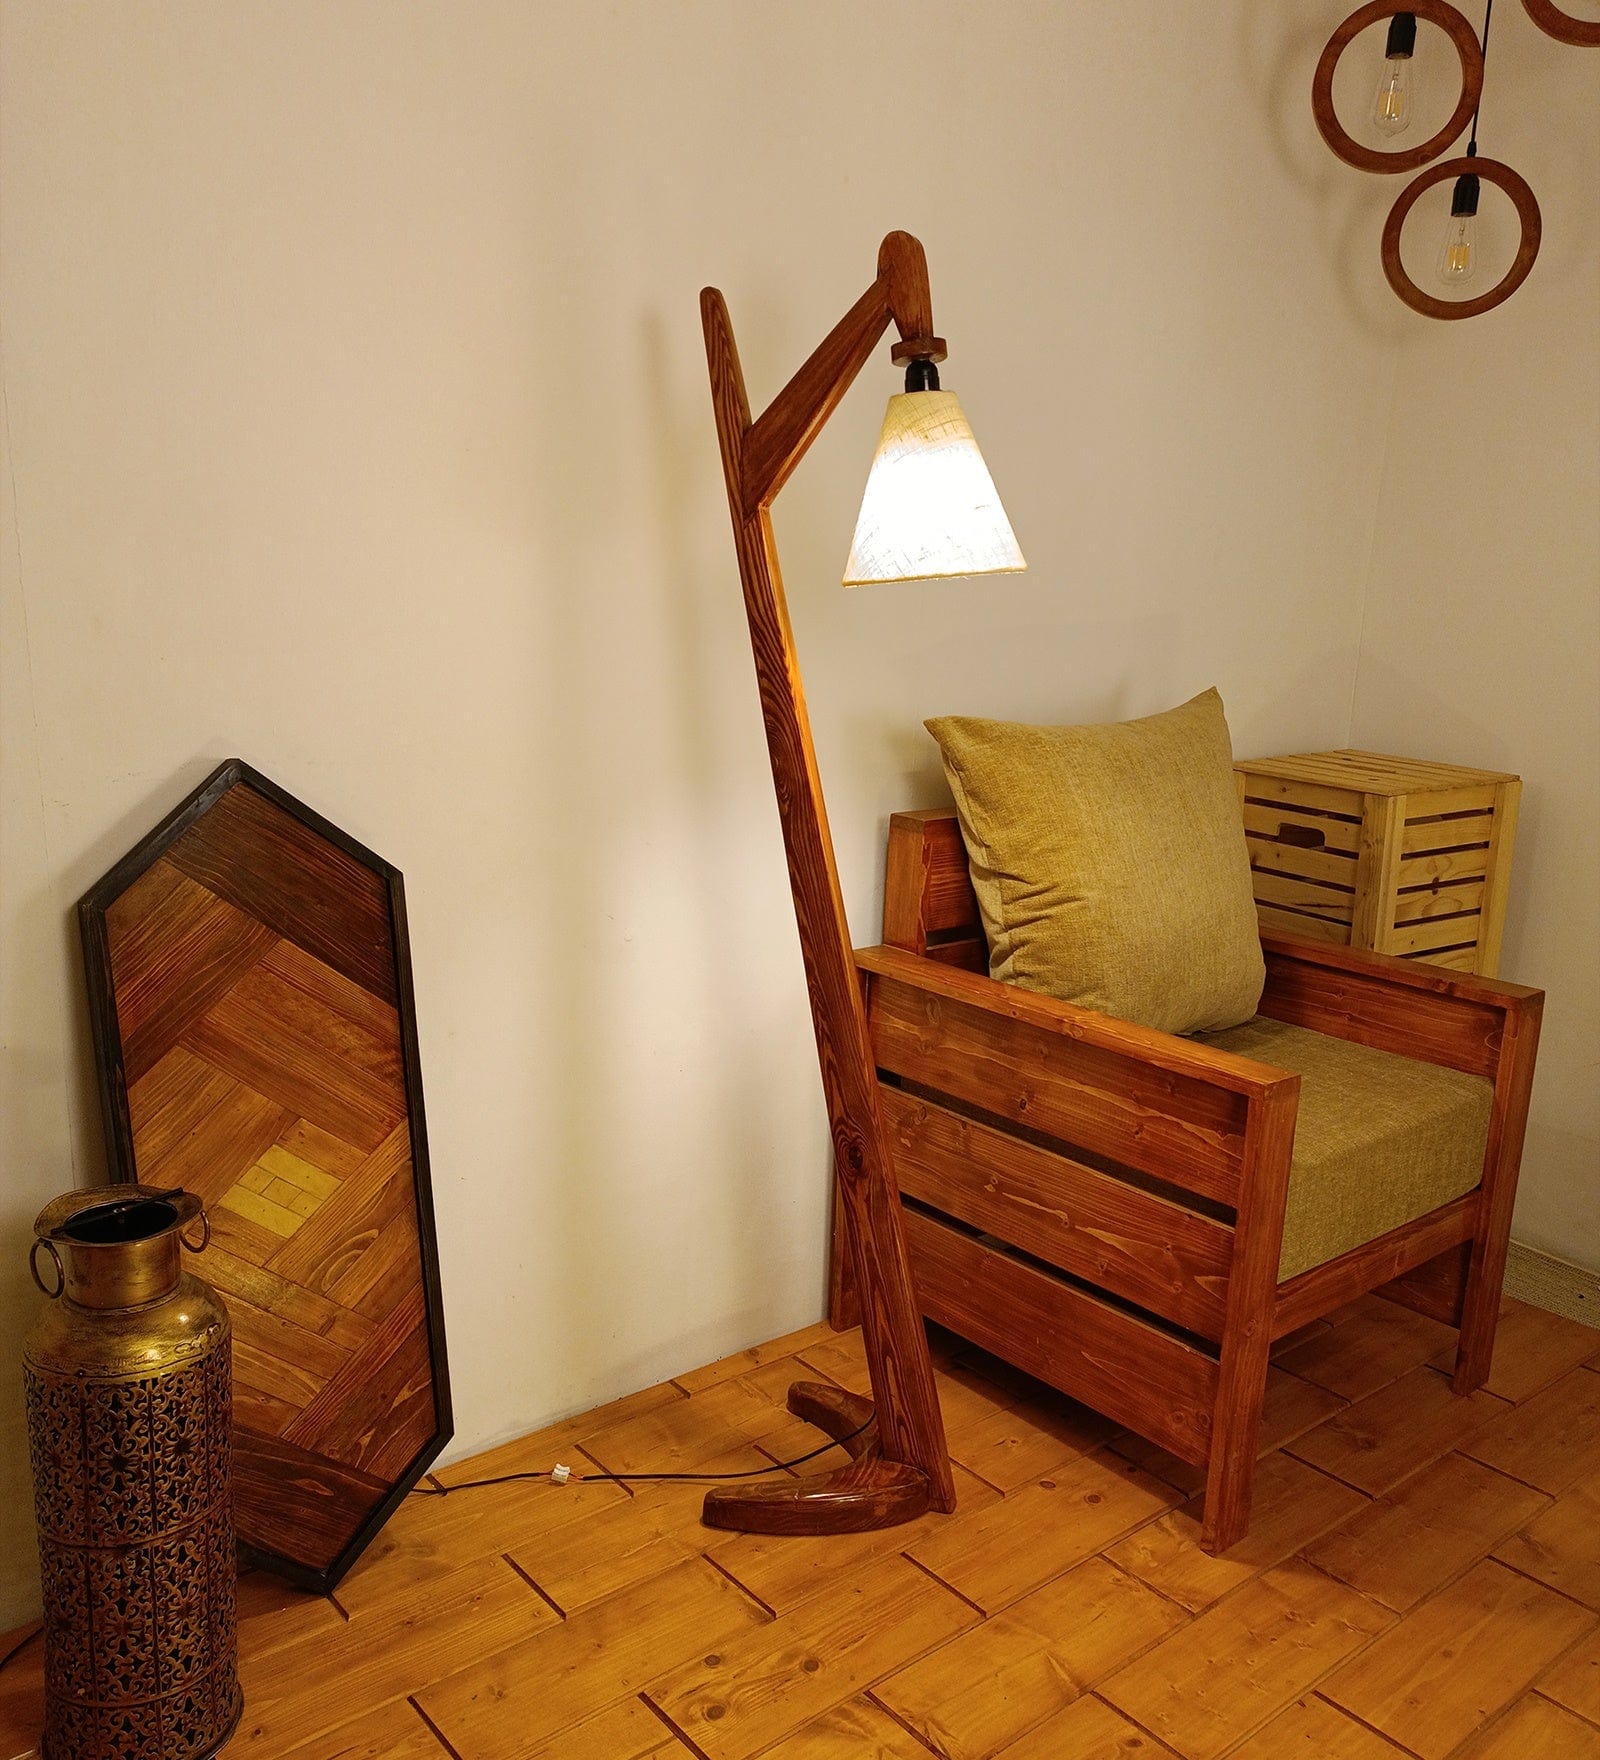 Druid Wooden Floor Lamp with Brown Base and Jute Fabric Lampshade (BULB NOT INCLUDED)